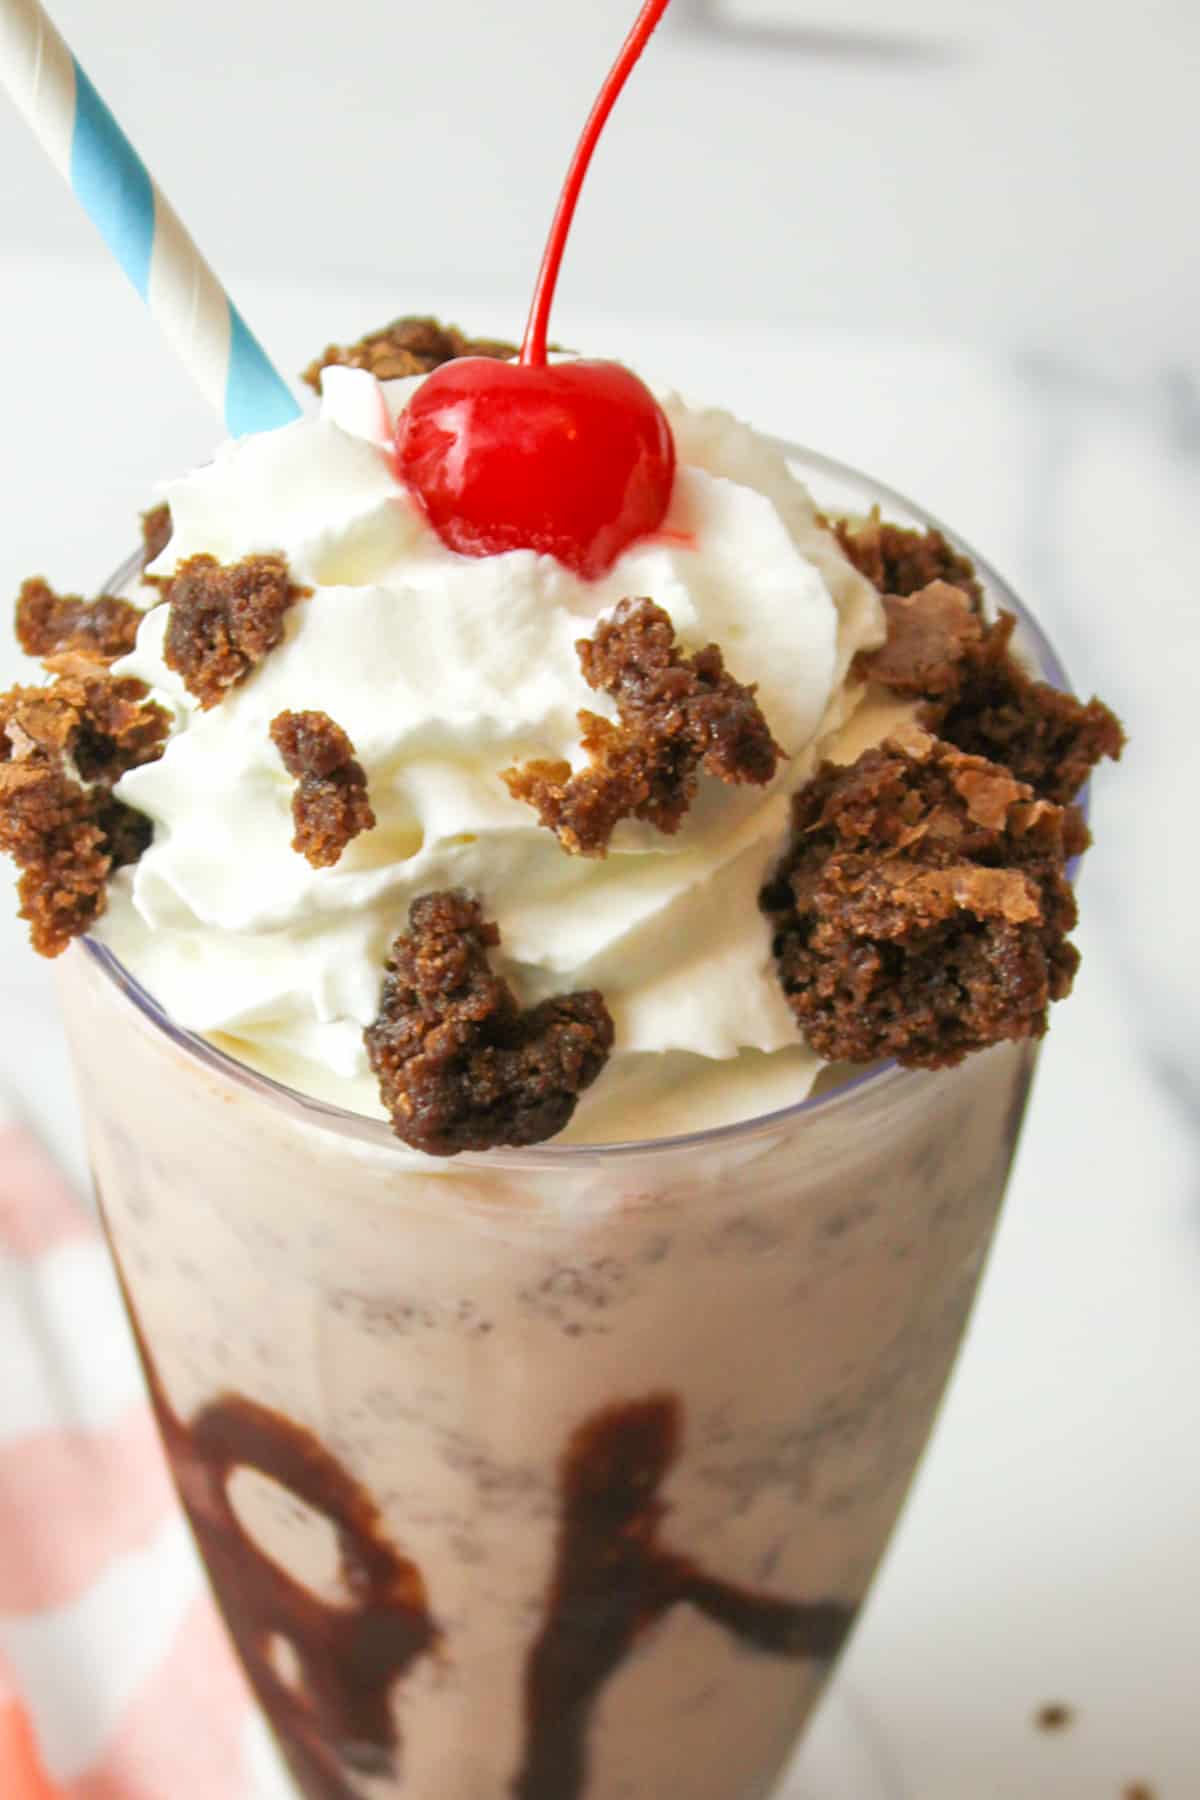 an upclose view of a brownie milkshake garnished with whipped cream, a cherry, and brownie crumbles